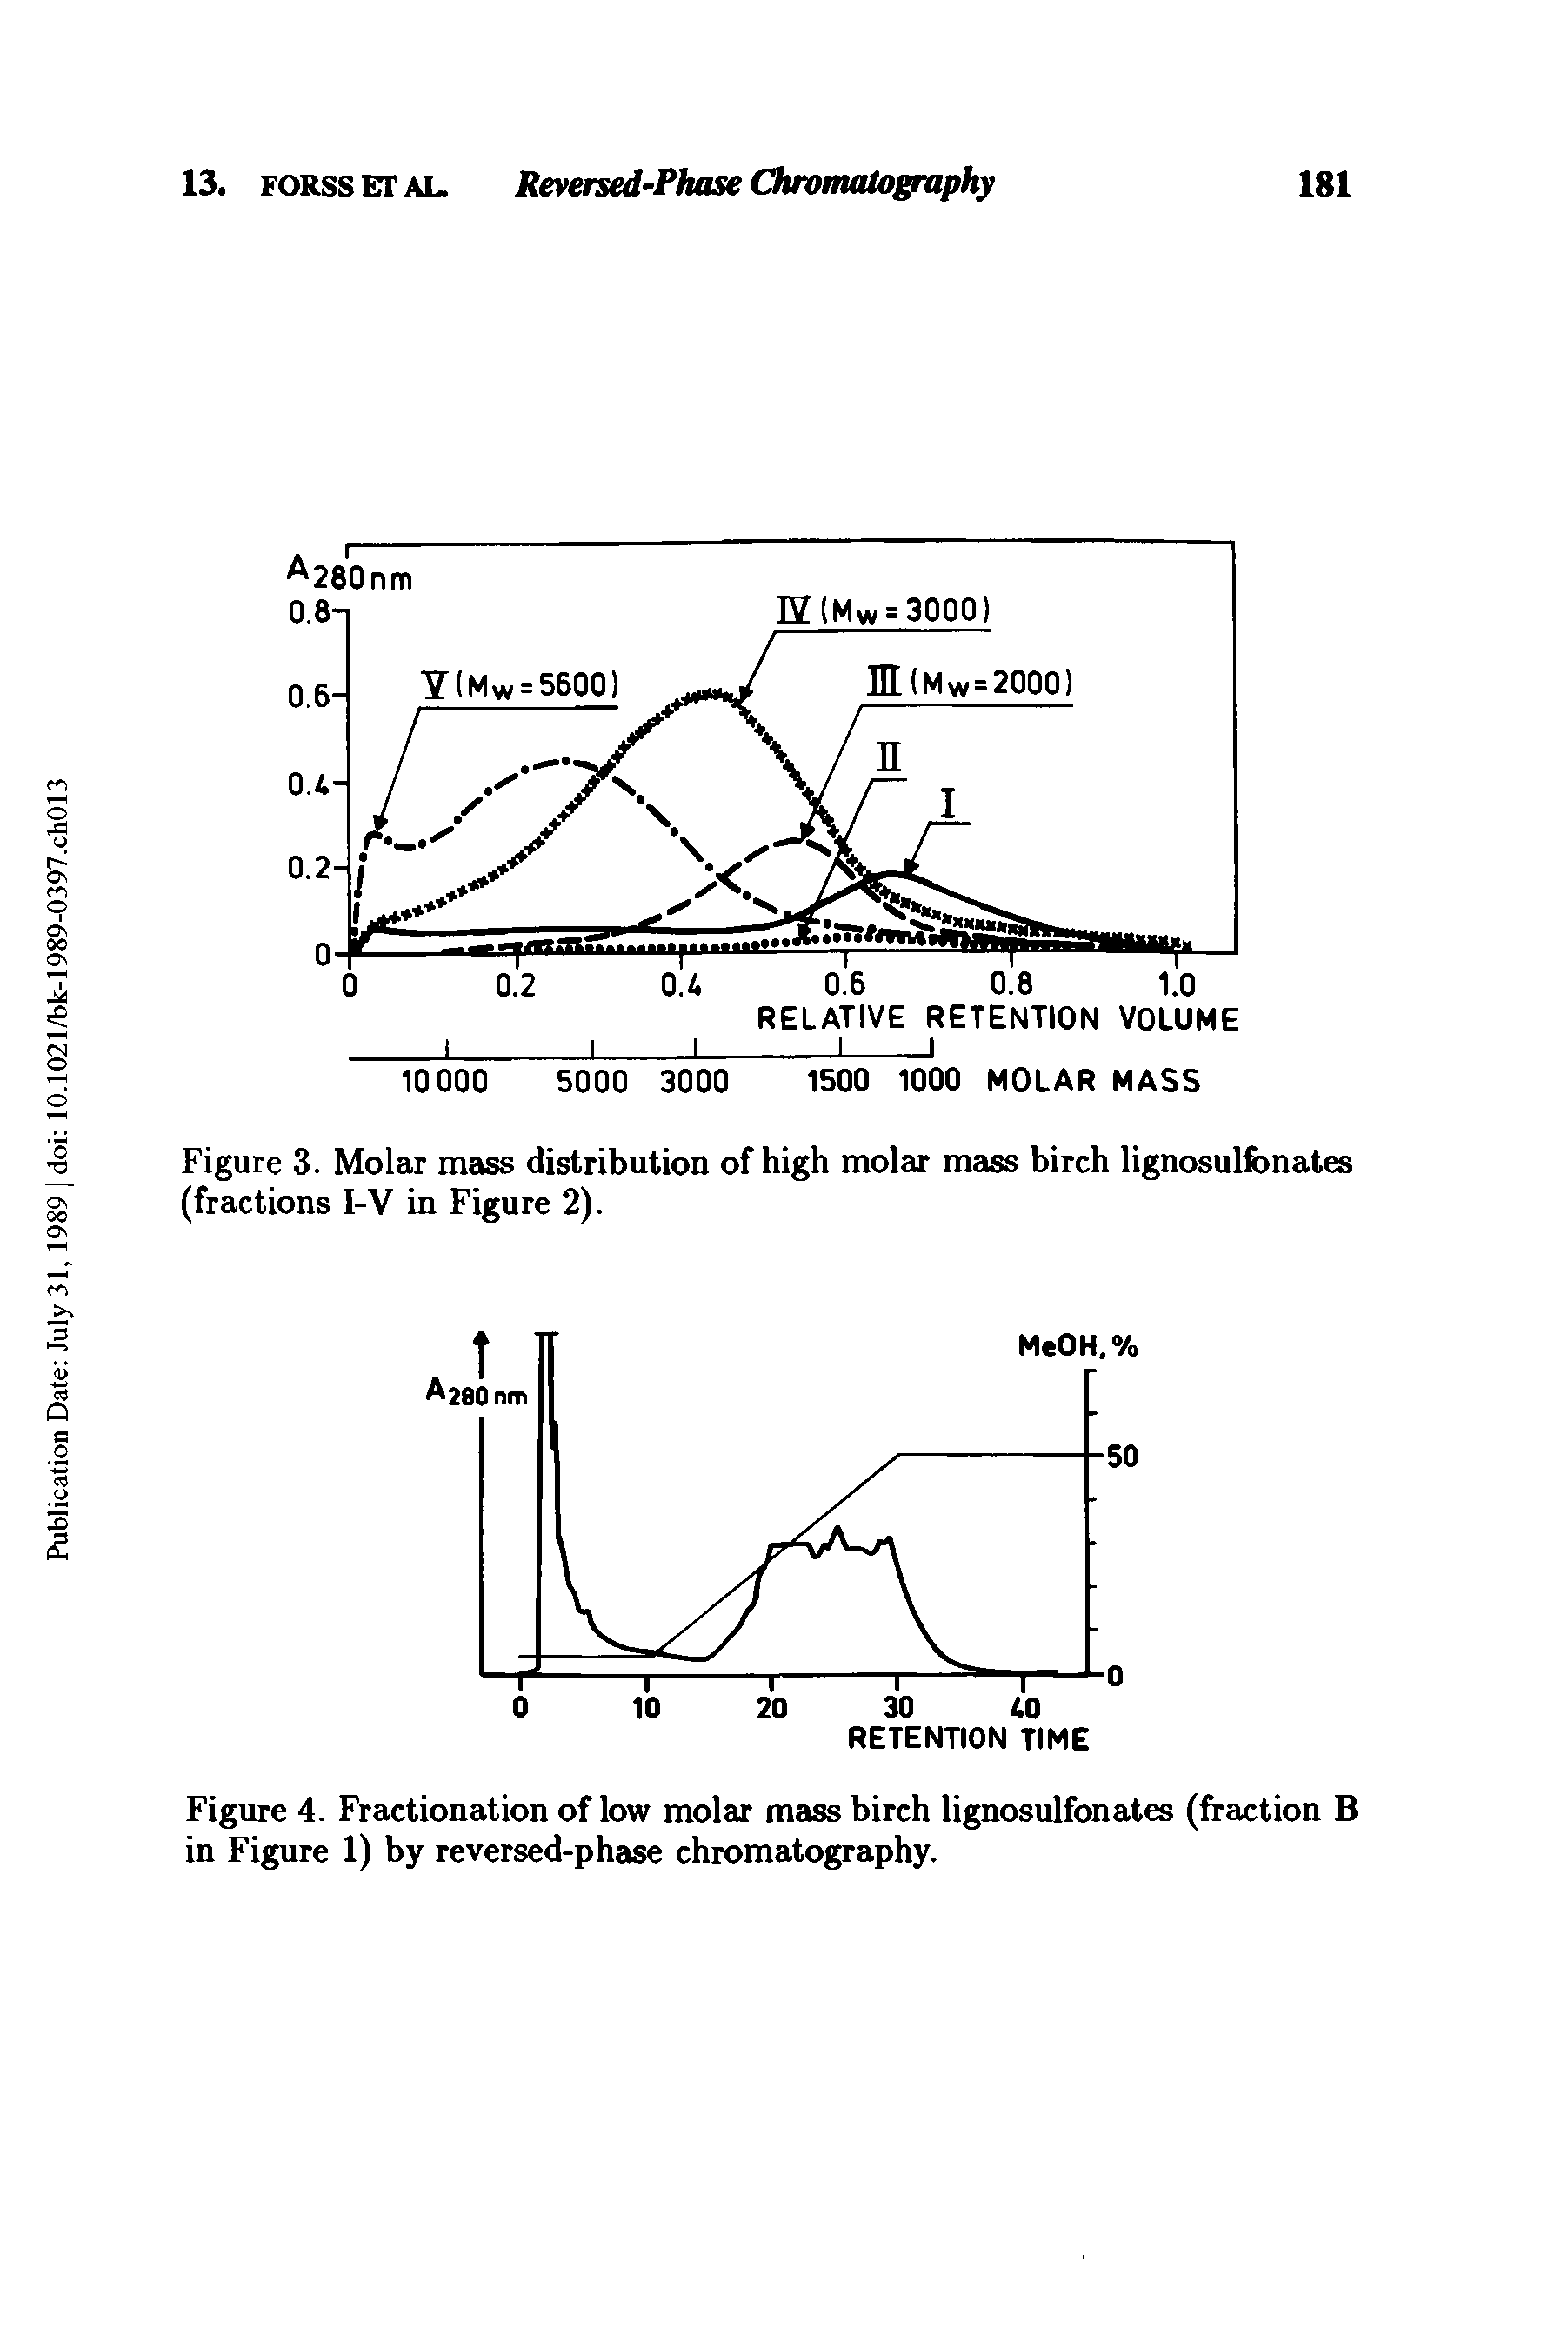 Figure 4. Fractionation of low molar mass birch lignosulfonates (fraction B in Figure 1) by re versed-phase chromatography.